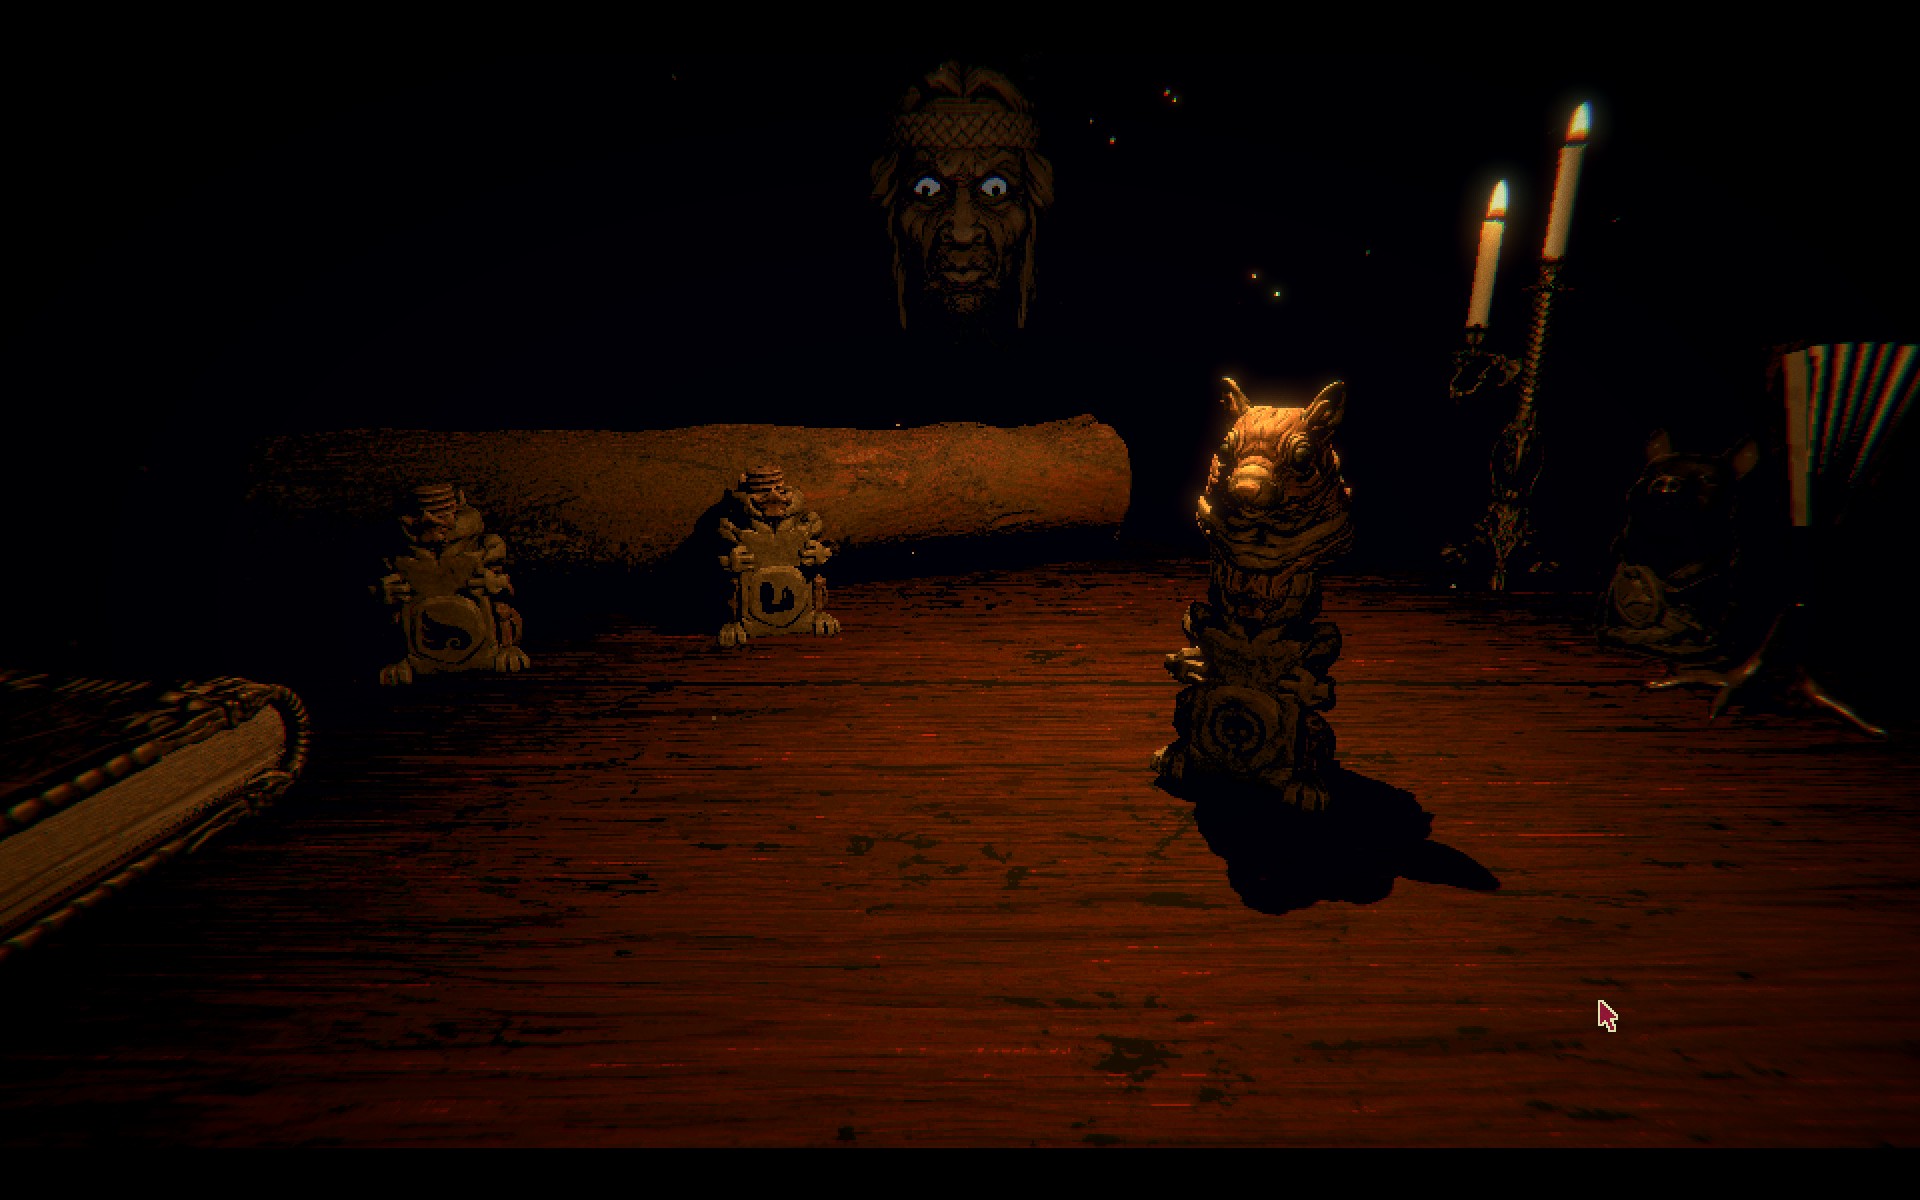 A screenshot from the game Inscryption, showing a dark wooden gaming table with a looming figure watching over. On the table sits a two-piece small statue with the head of a squirrel. 